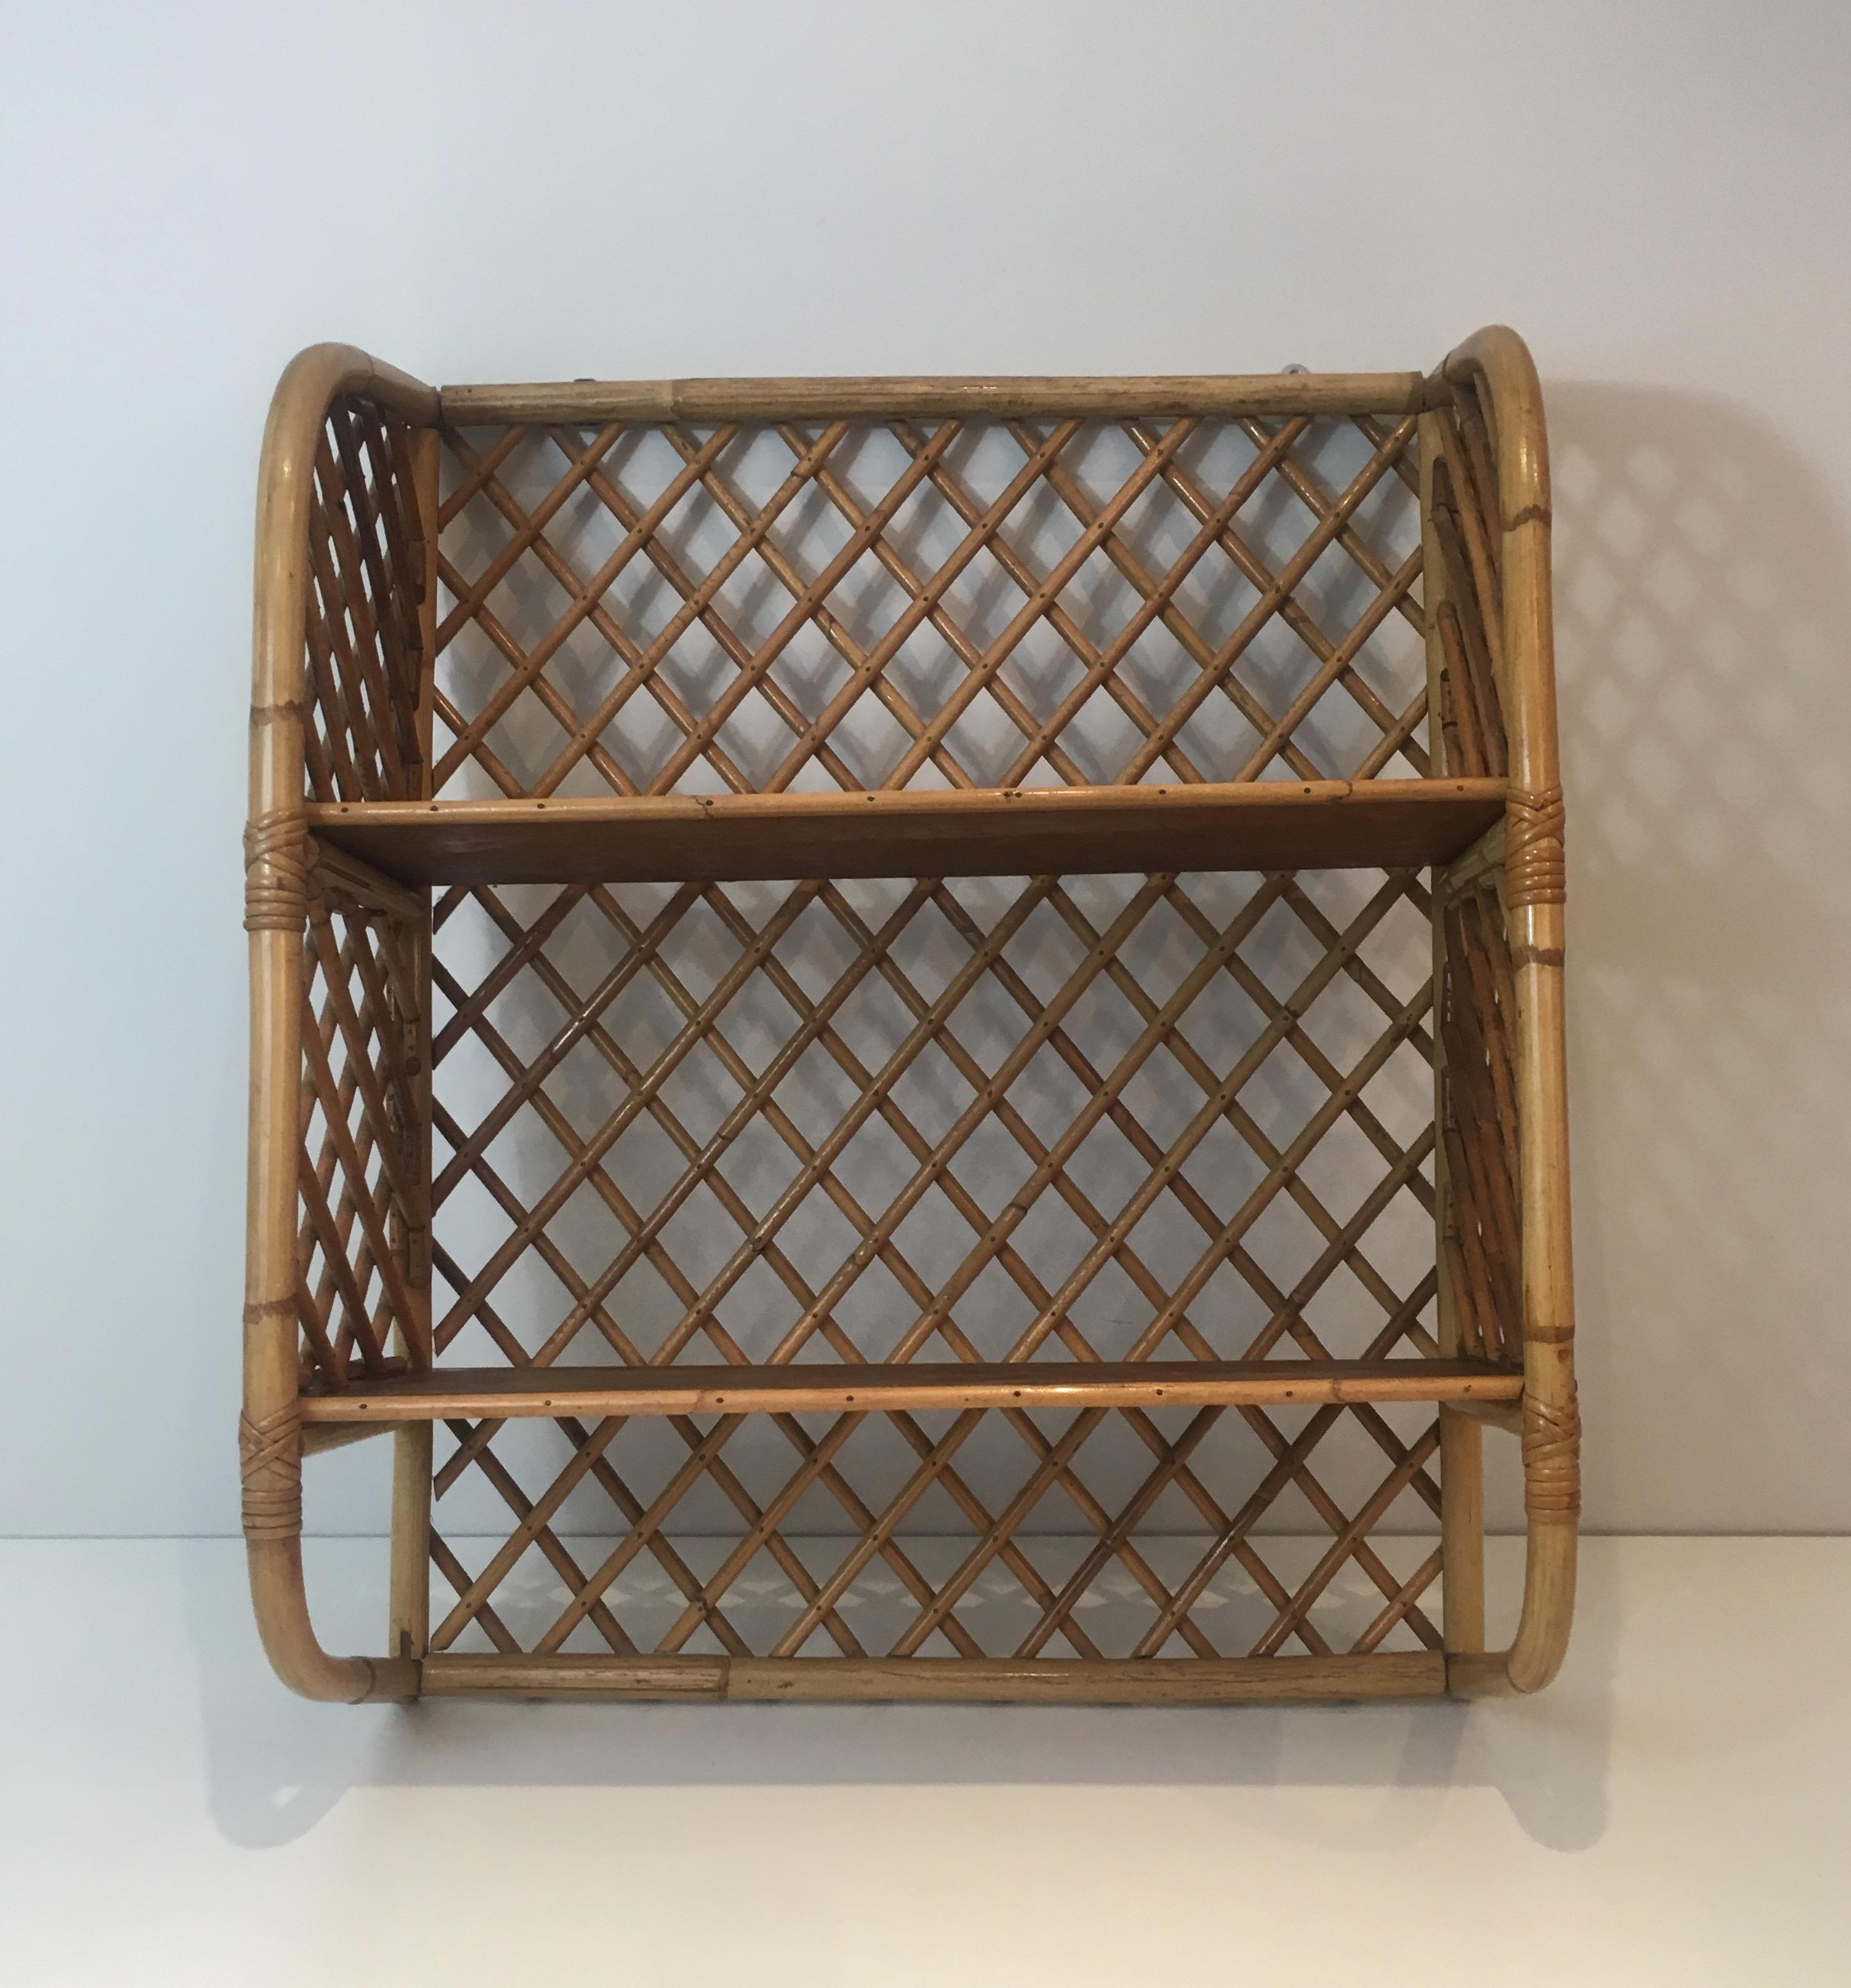 Attributed to Audoux Minet, Rattan and Wood Wall Shelves, French, circa 1950 For Sale 14